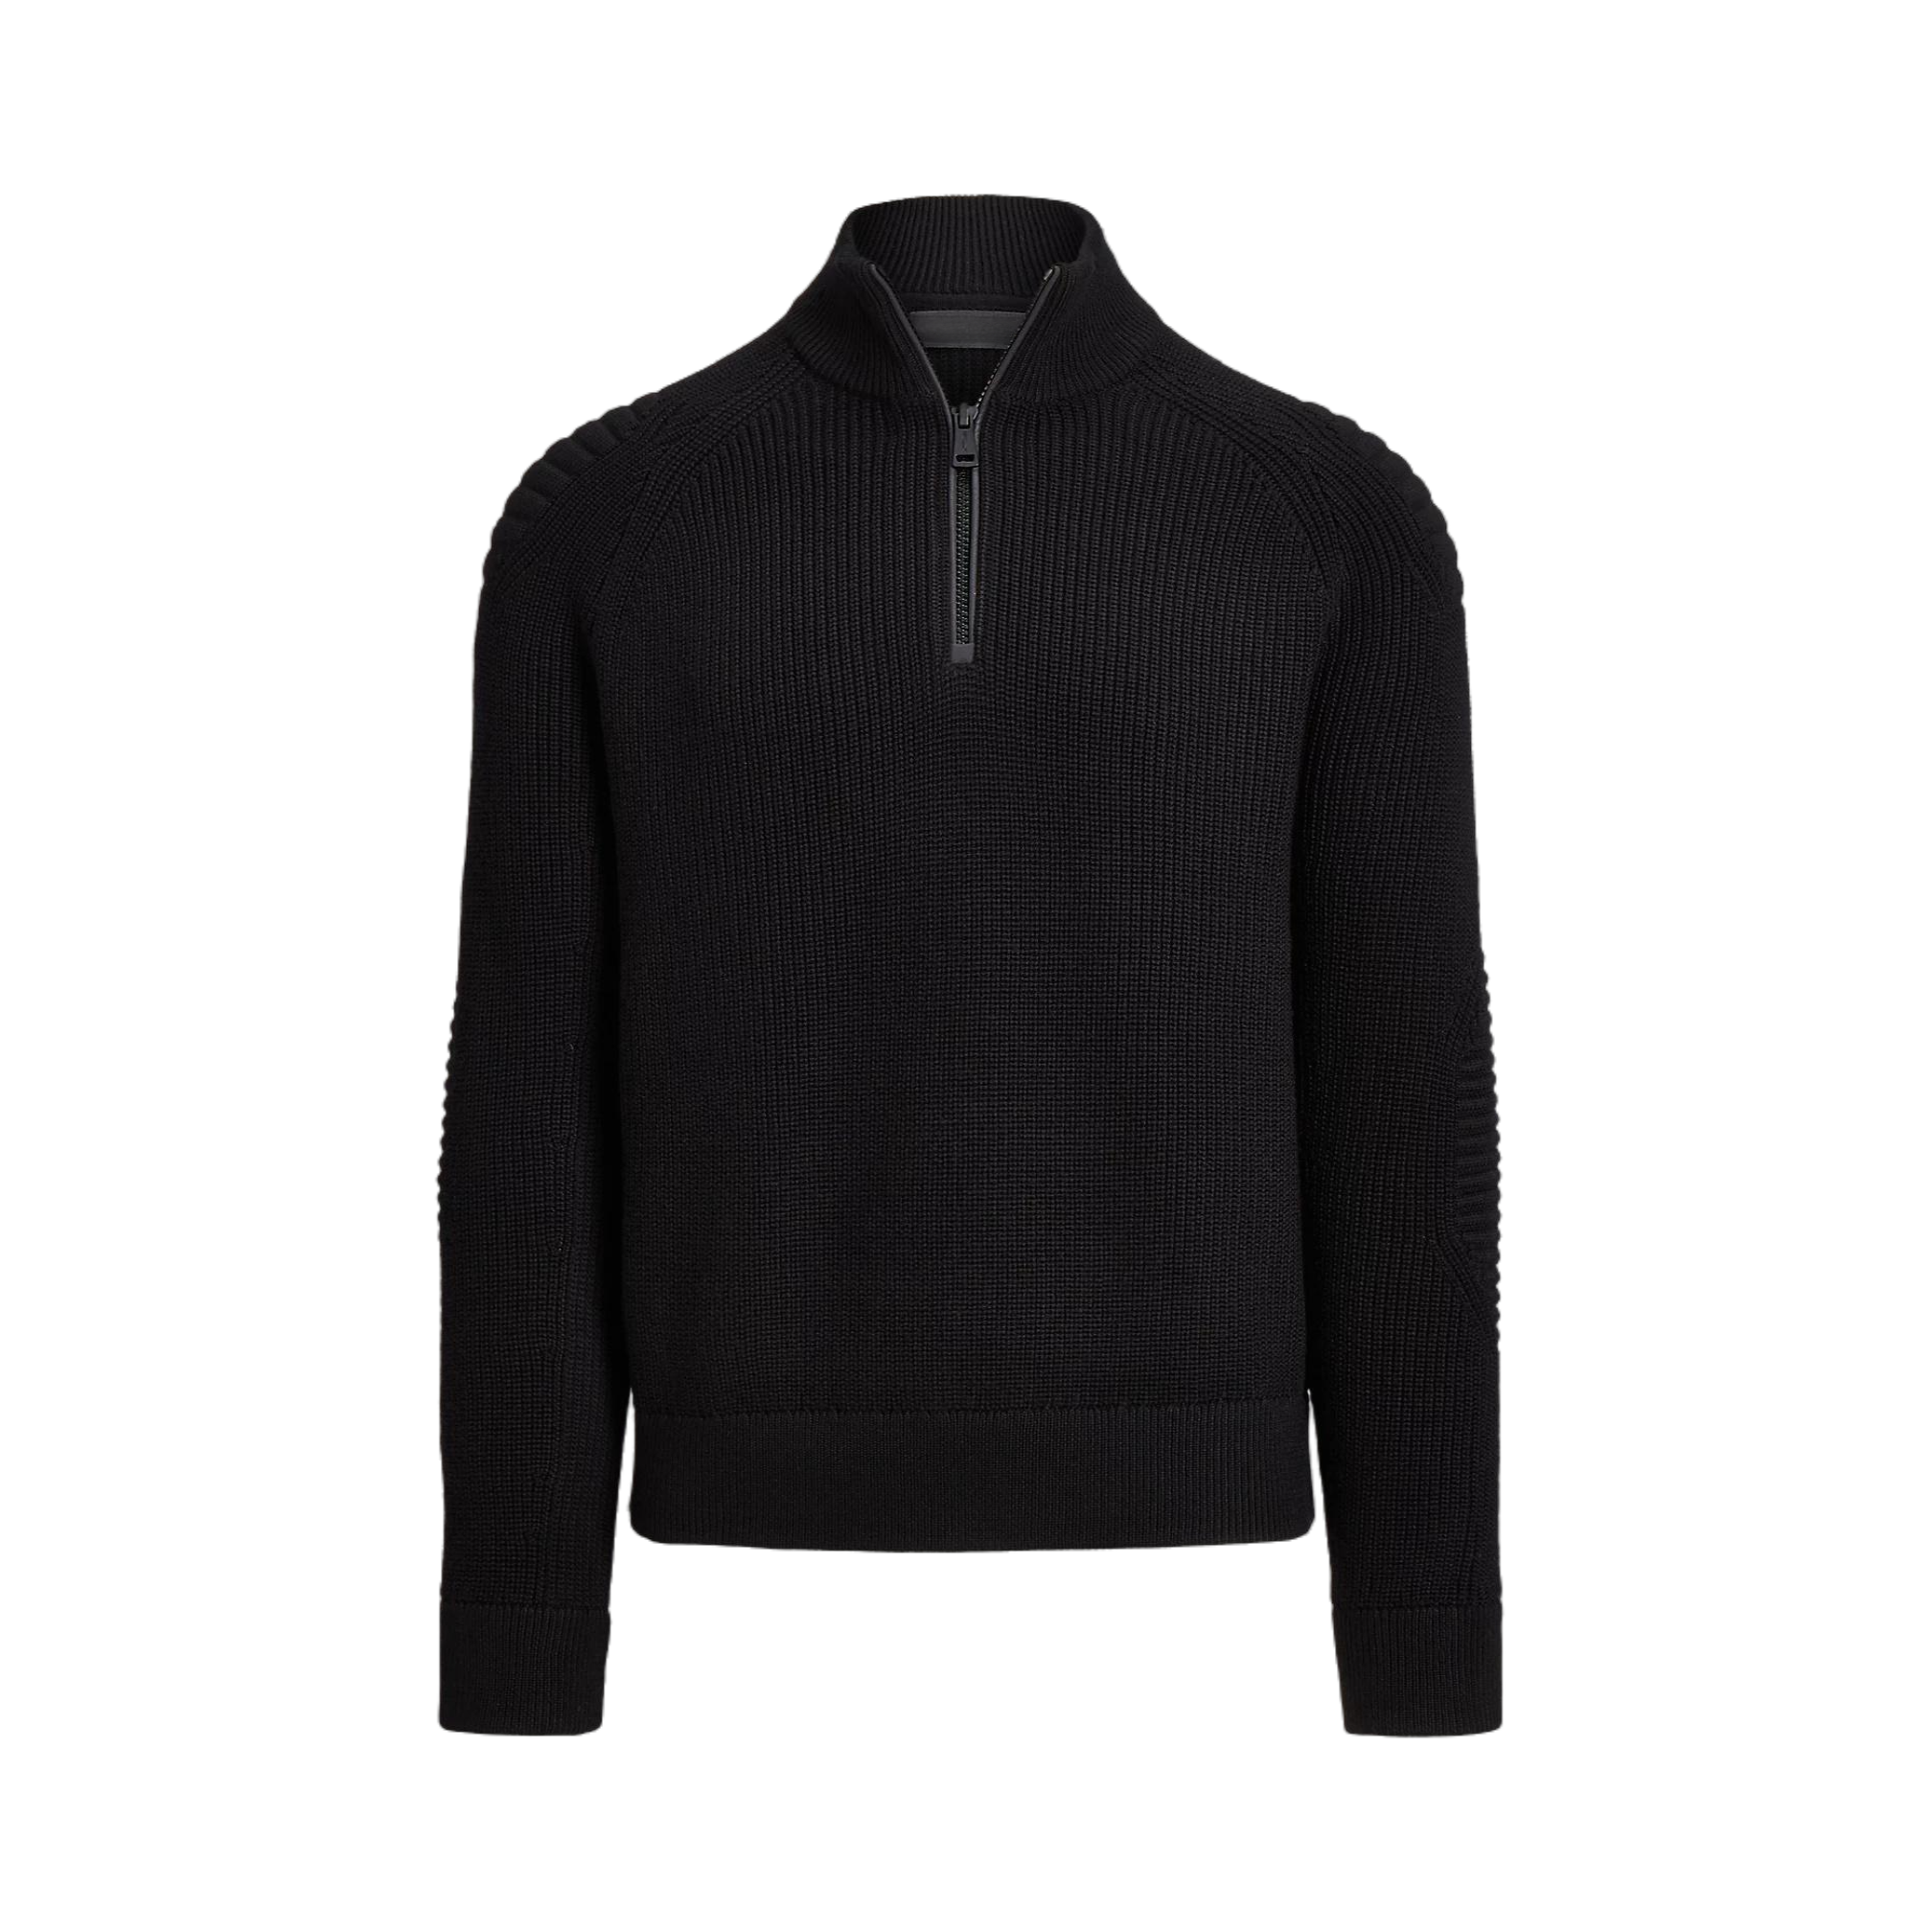 Hot Pure Wool High Neck Full Cardigan with Quarter-Zip for Men’s Knitwear